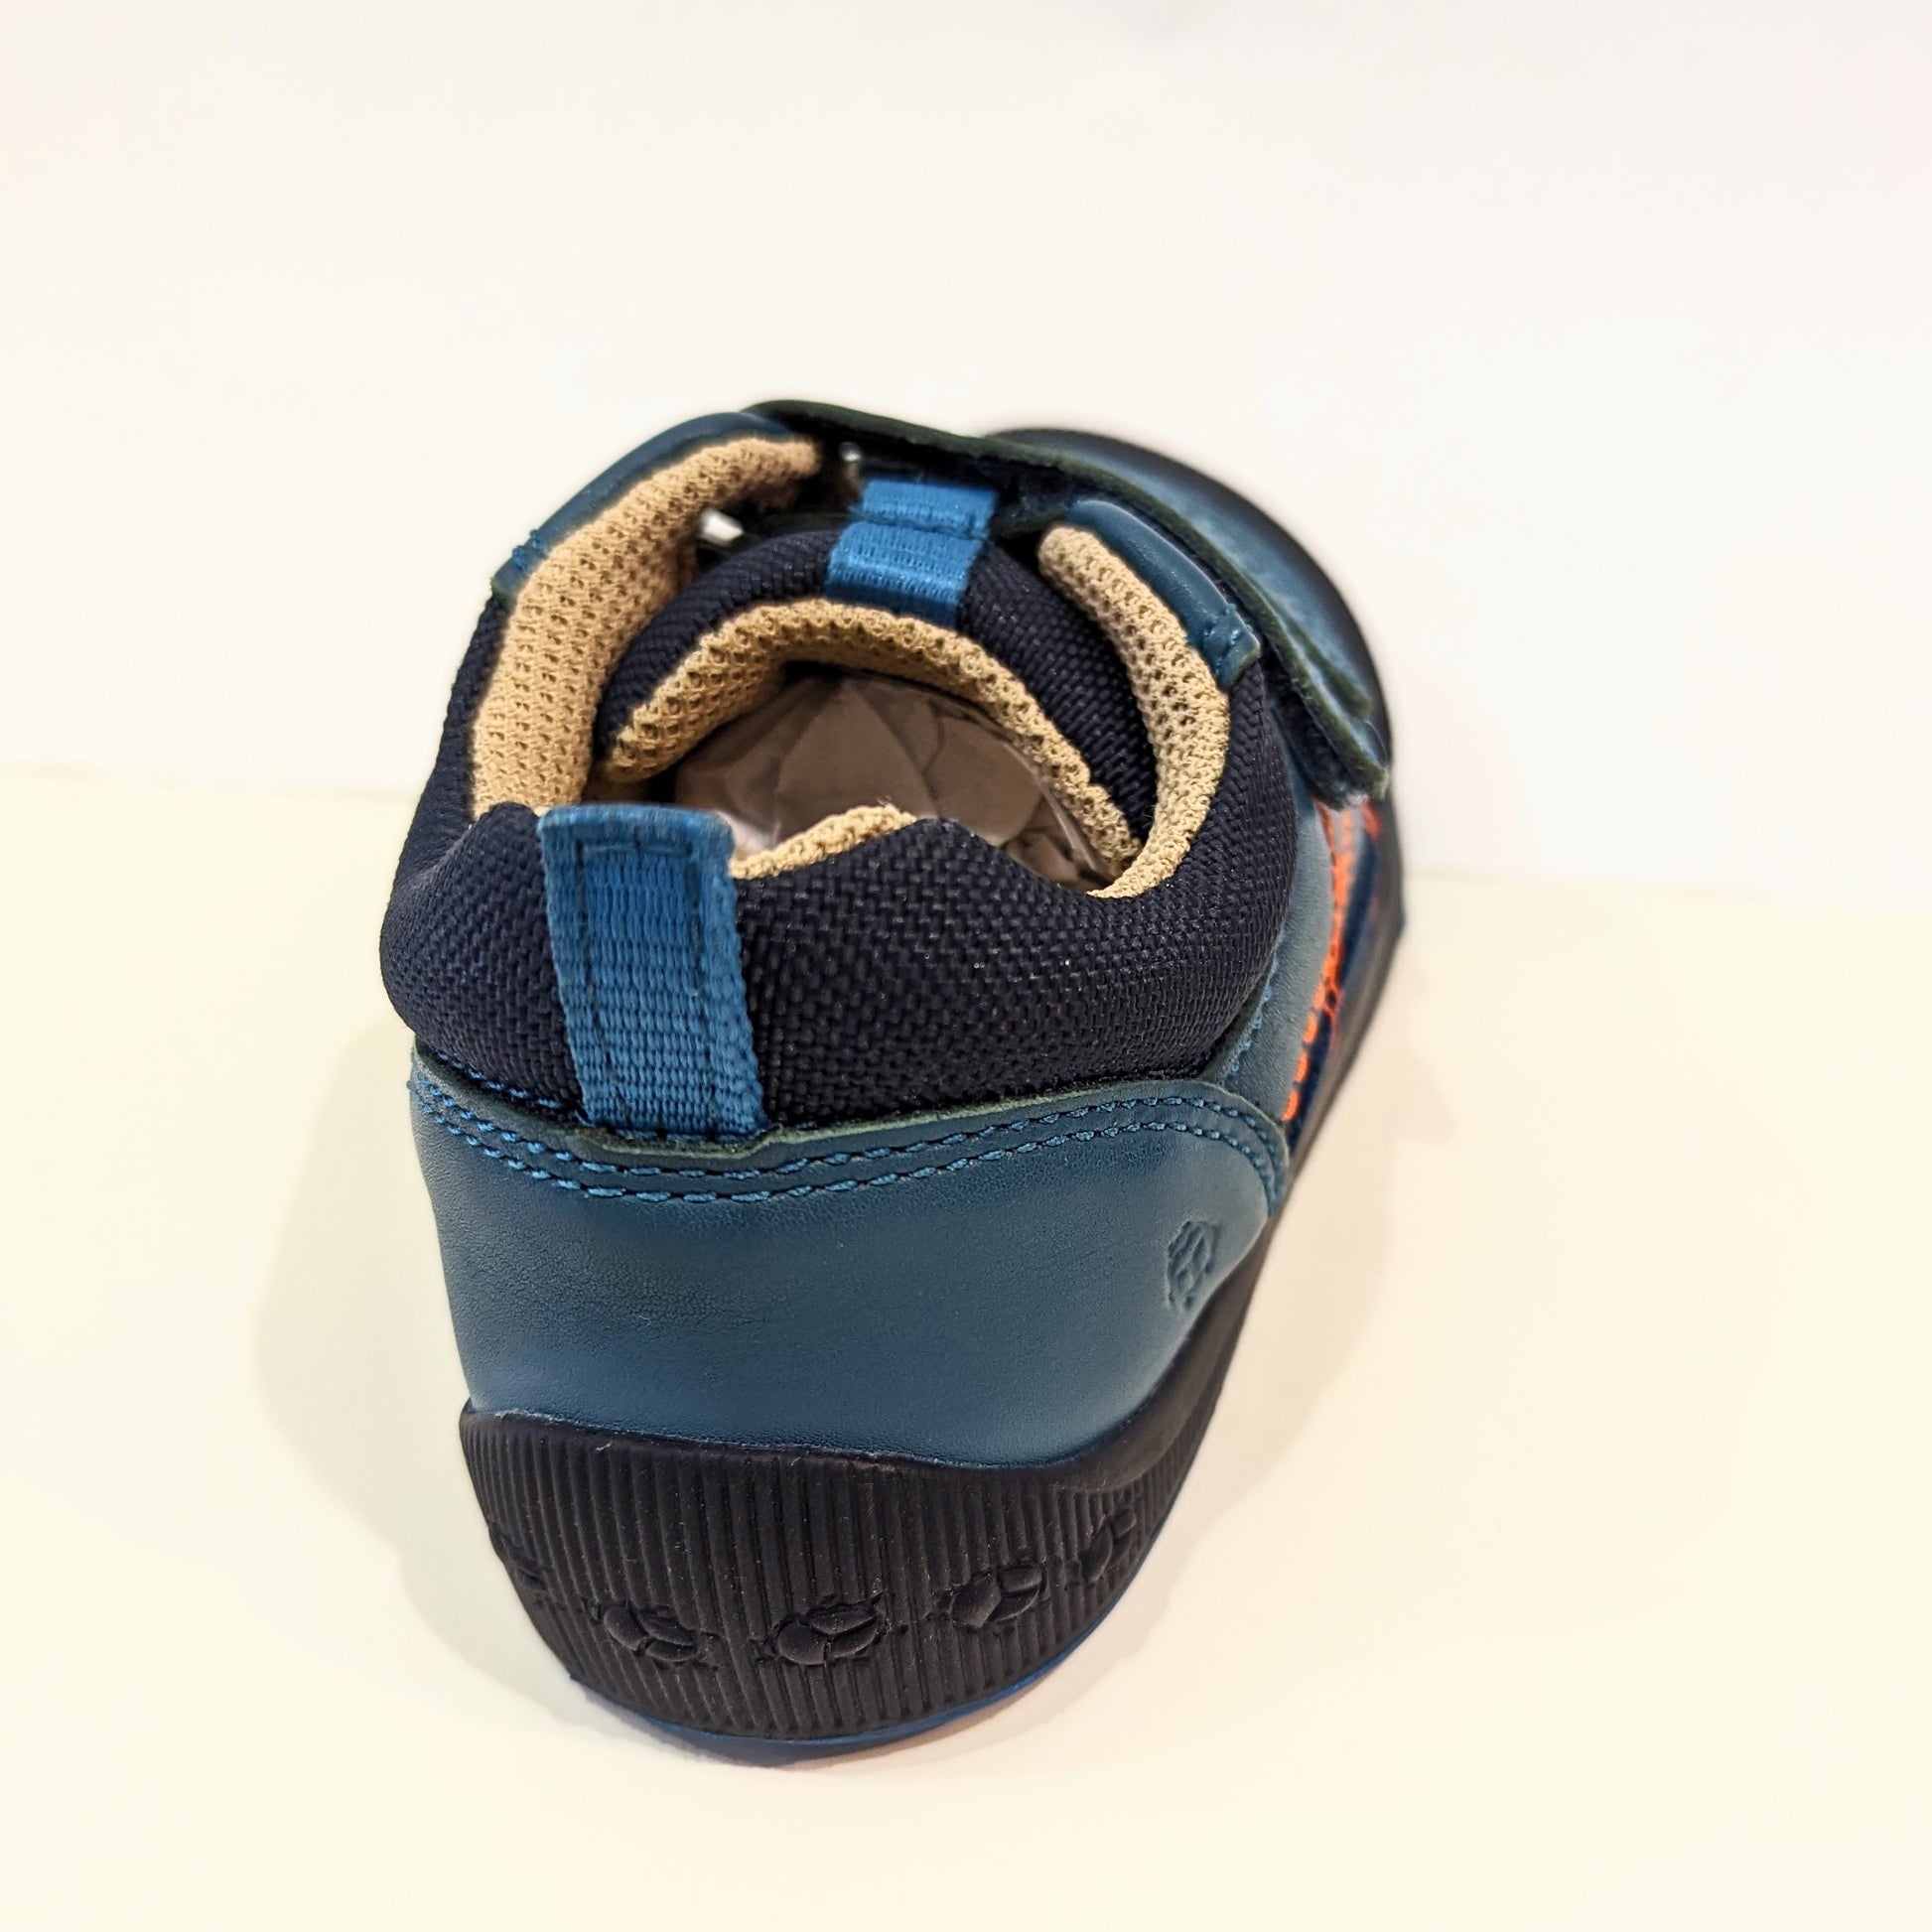 A boys casual shoe by Start Rite, style Tickle, in teal leather with double velcro fastening. Back view.